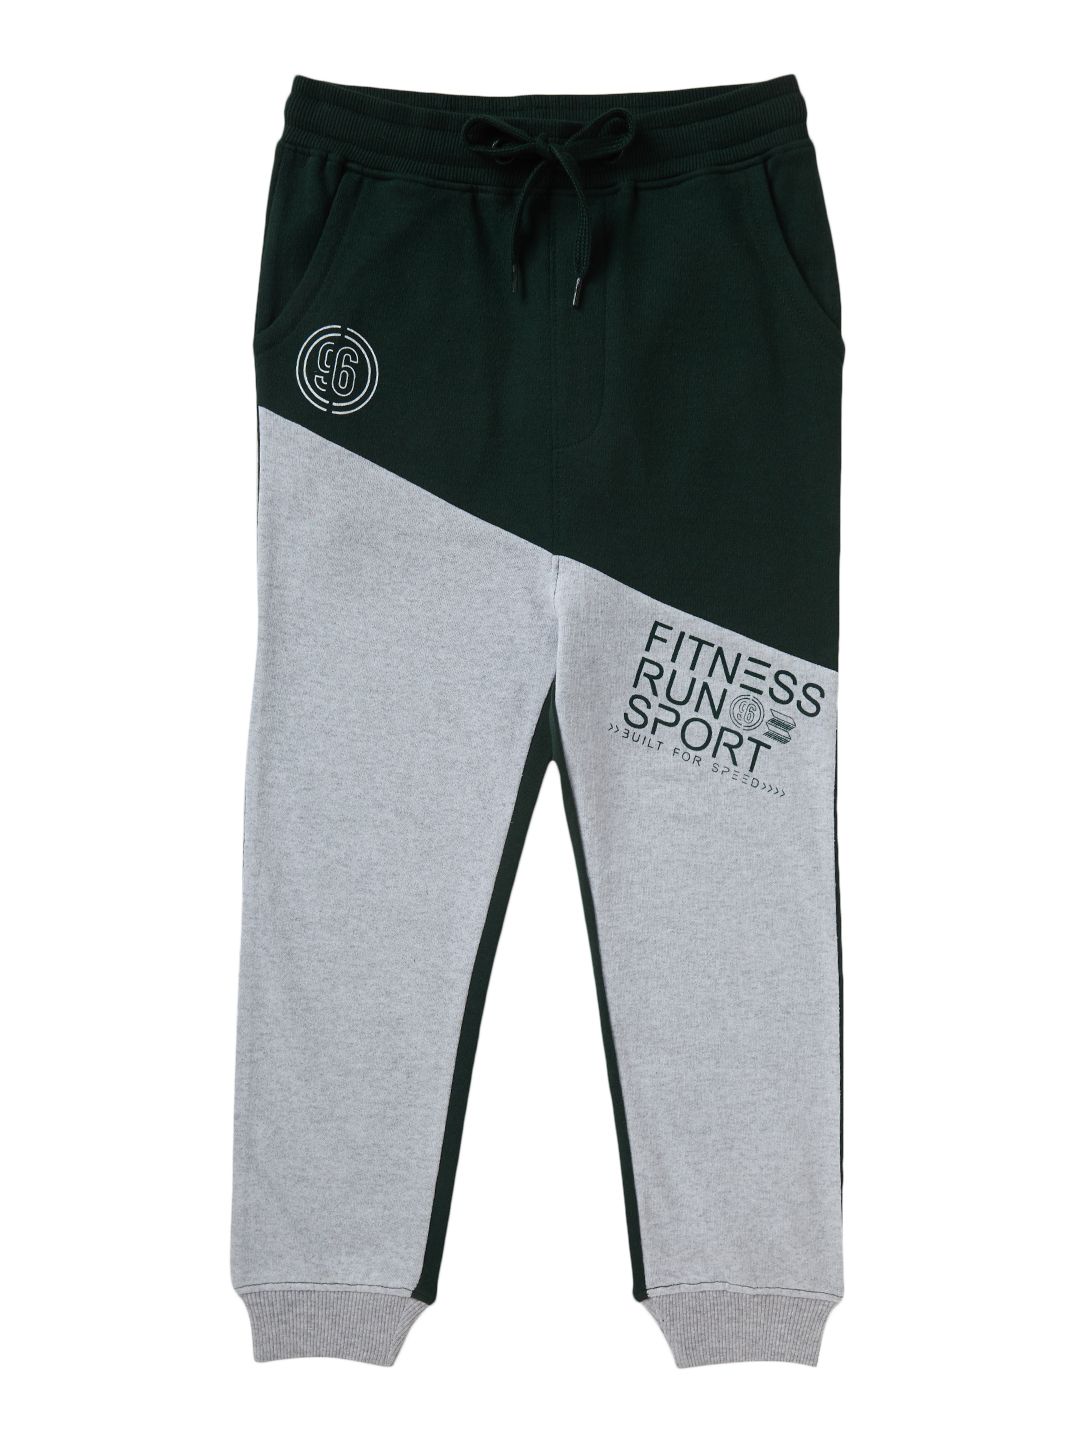 Boys Cotton Track Pant (Green & Grey , 4-12 years)